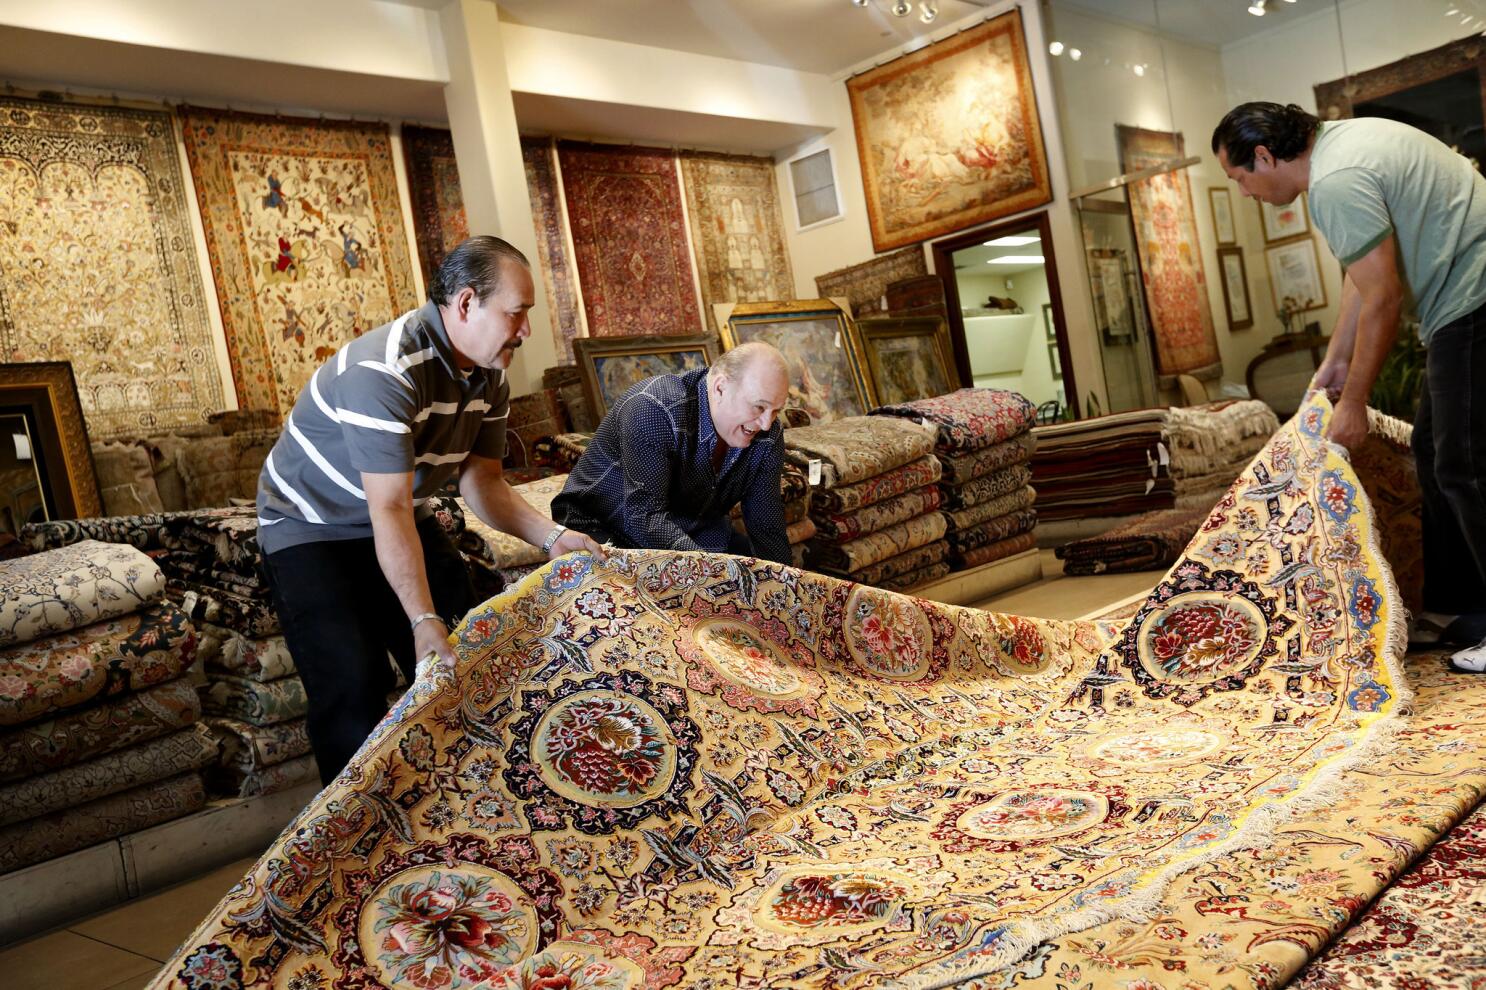 After Iran deal, imported Persian rugs hit LA - Los Angeles Times